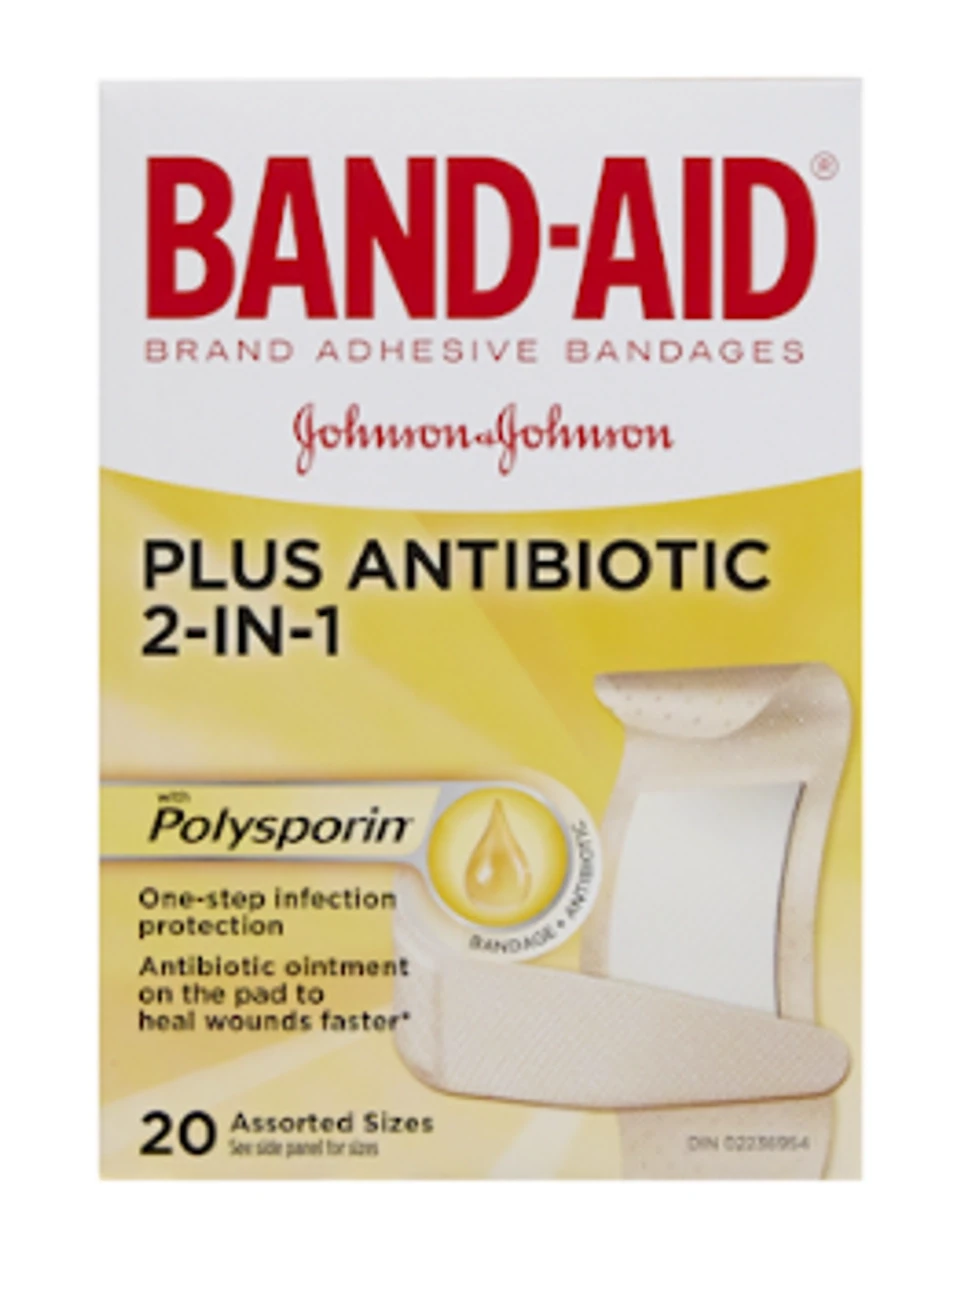 Band-Aid Plus Antibiotic 2-In-1 with Polysporin Bandages